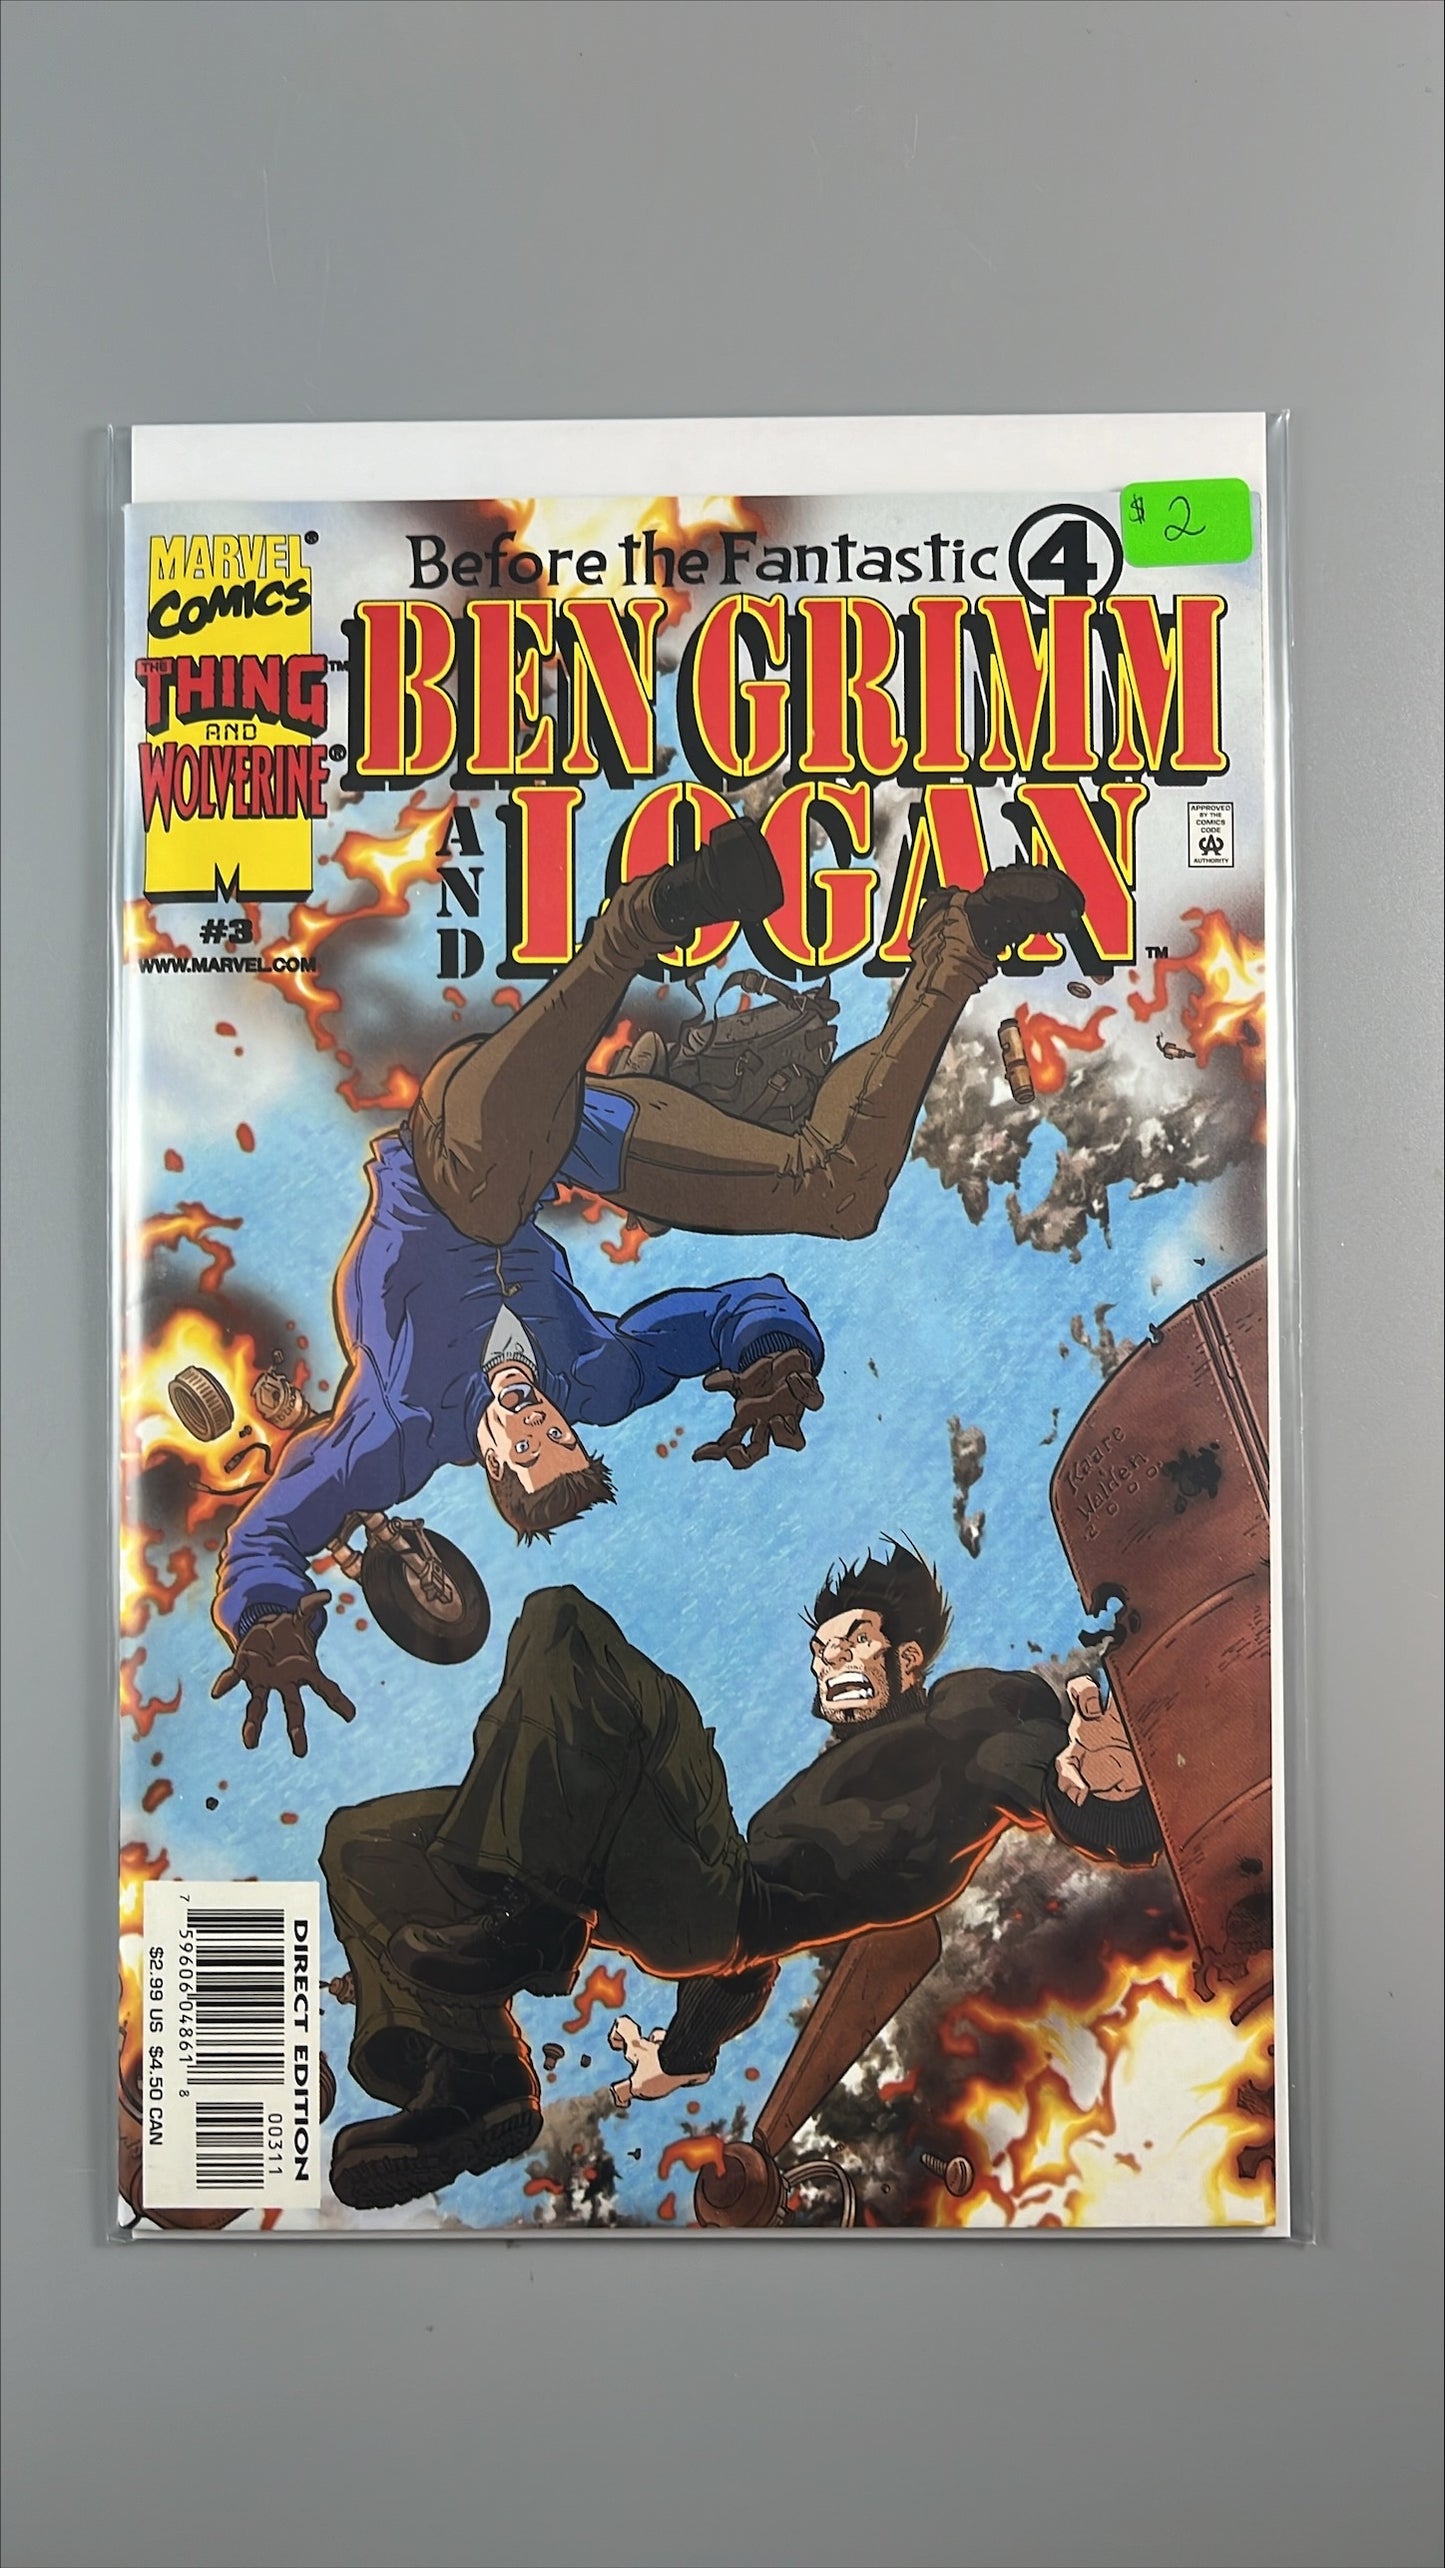 Before the Fantastic Four: Ben Grimm and Logan #3